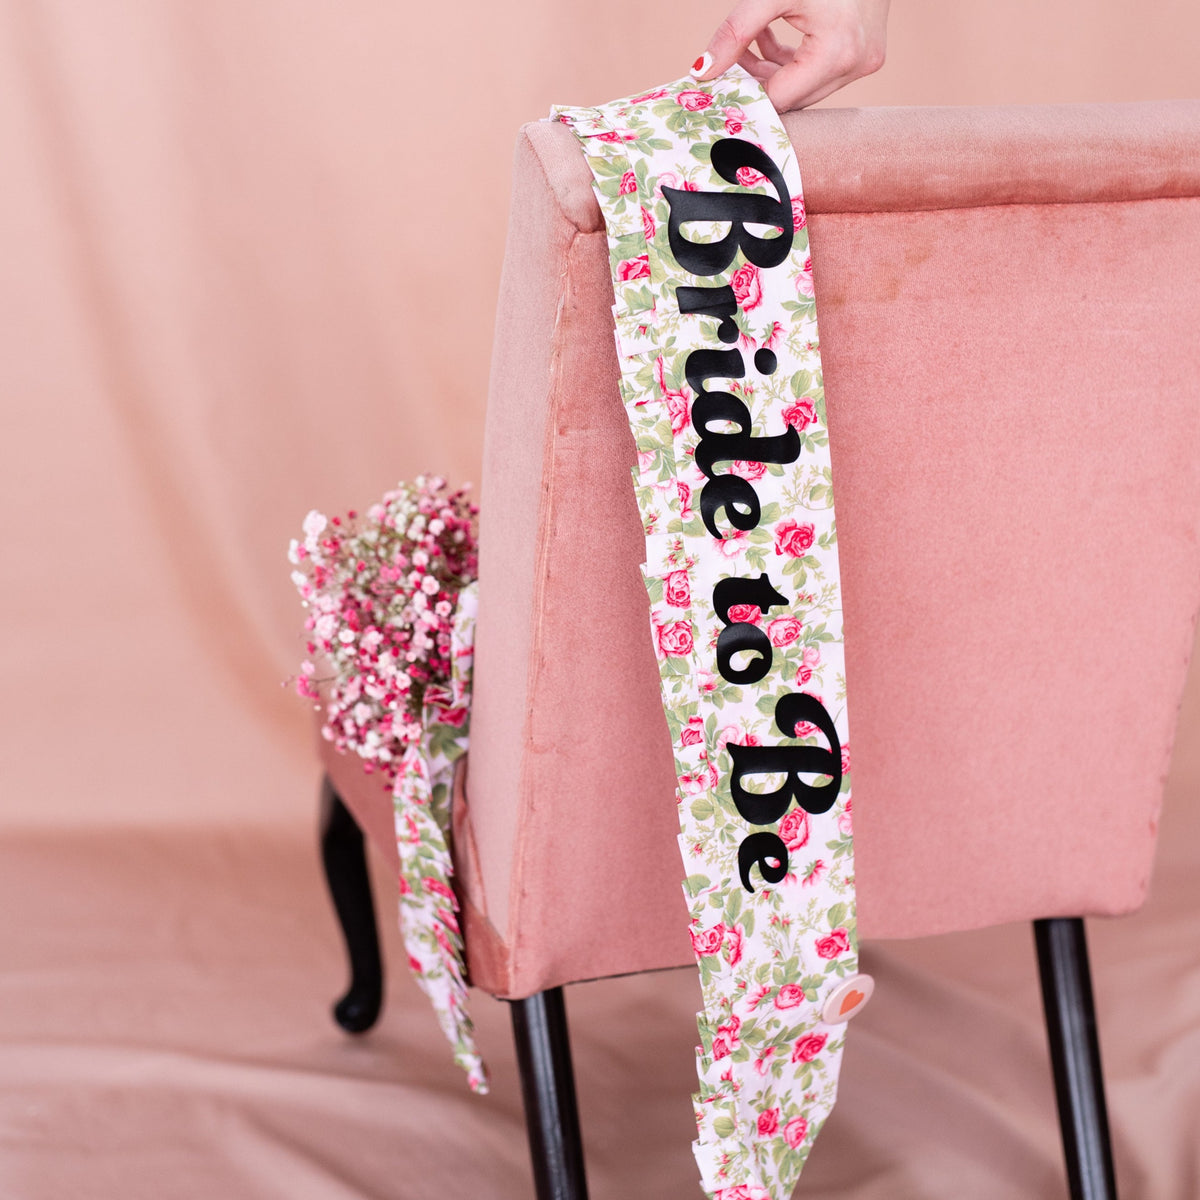 Ruffle Edge Rose Print Hen Party Sash - Personalisation available